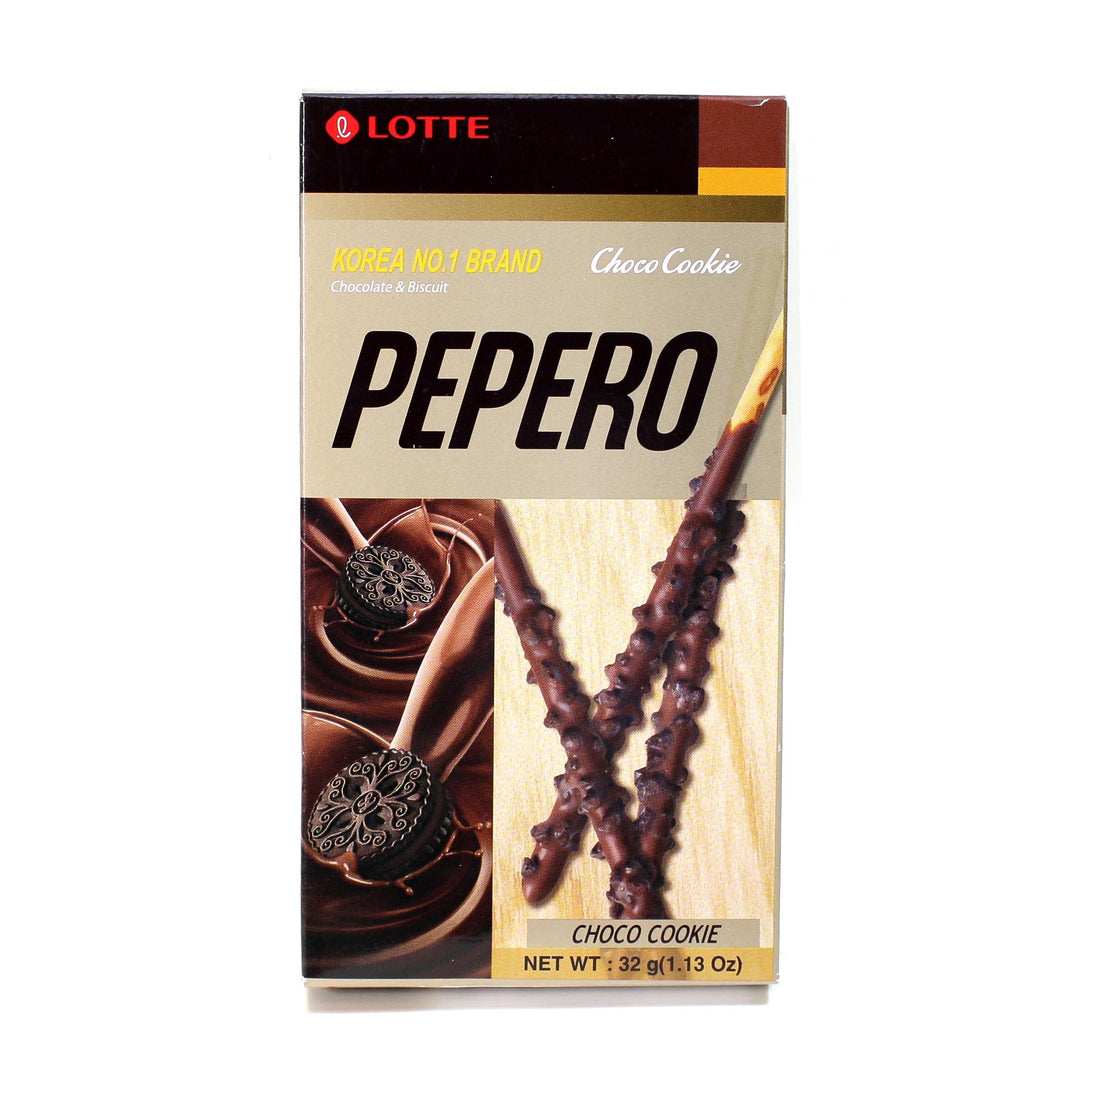 Lotte Pepero Choco Cookie 1.13oz(32g) - Anytime Basket